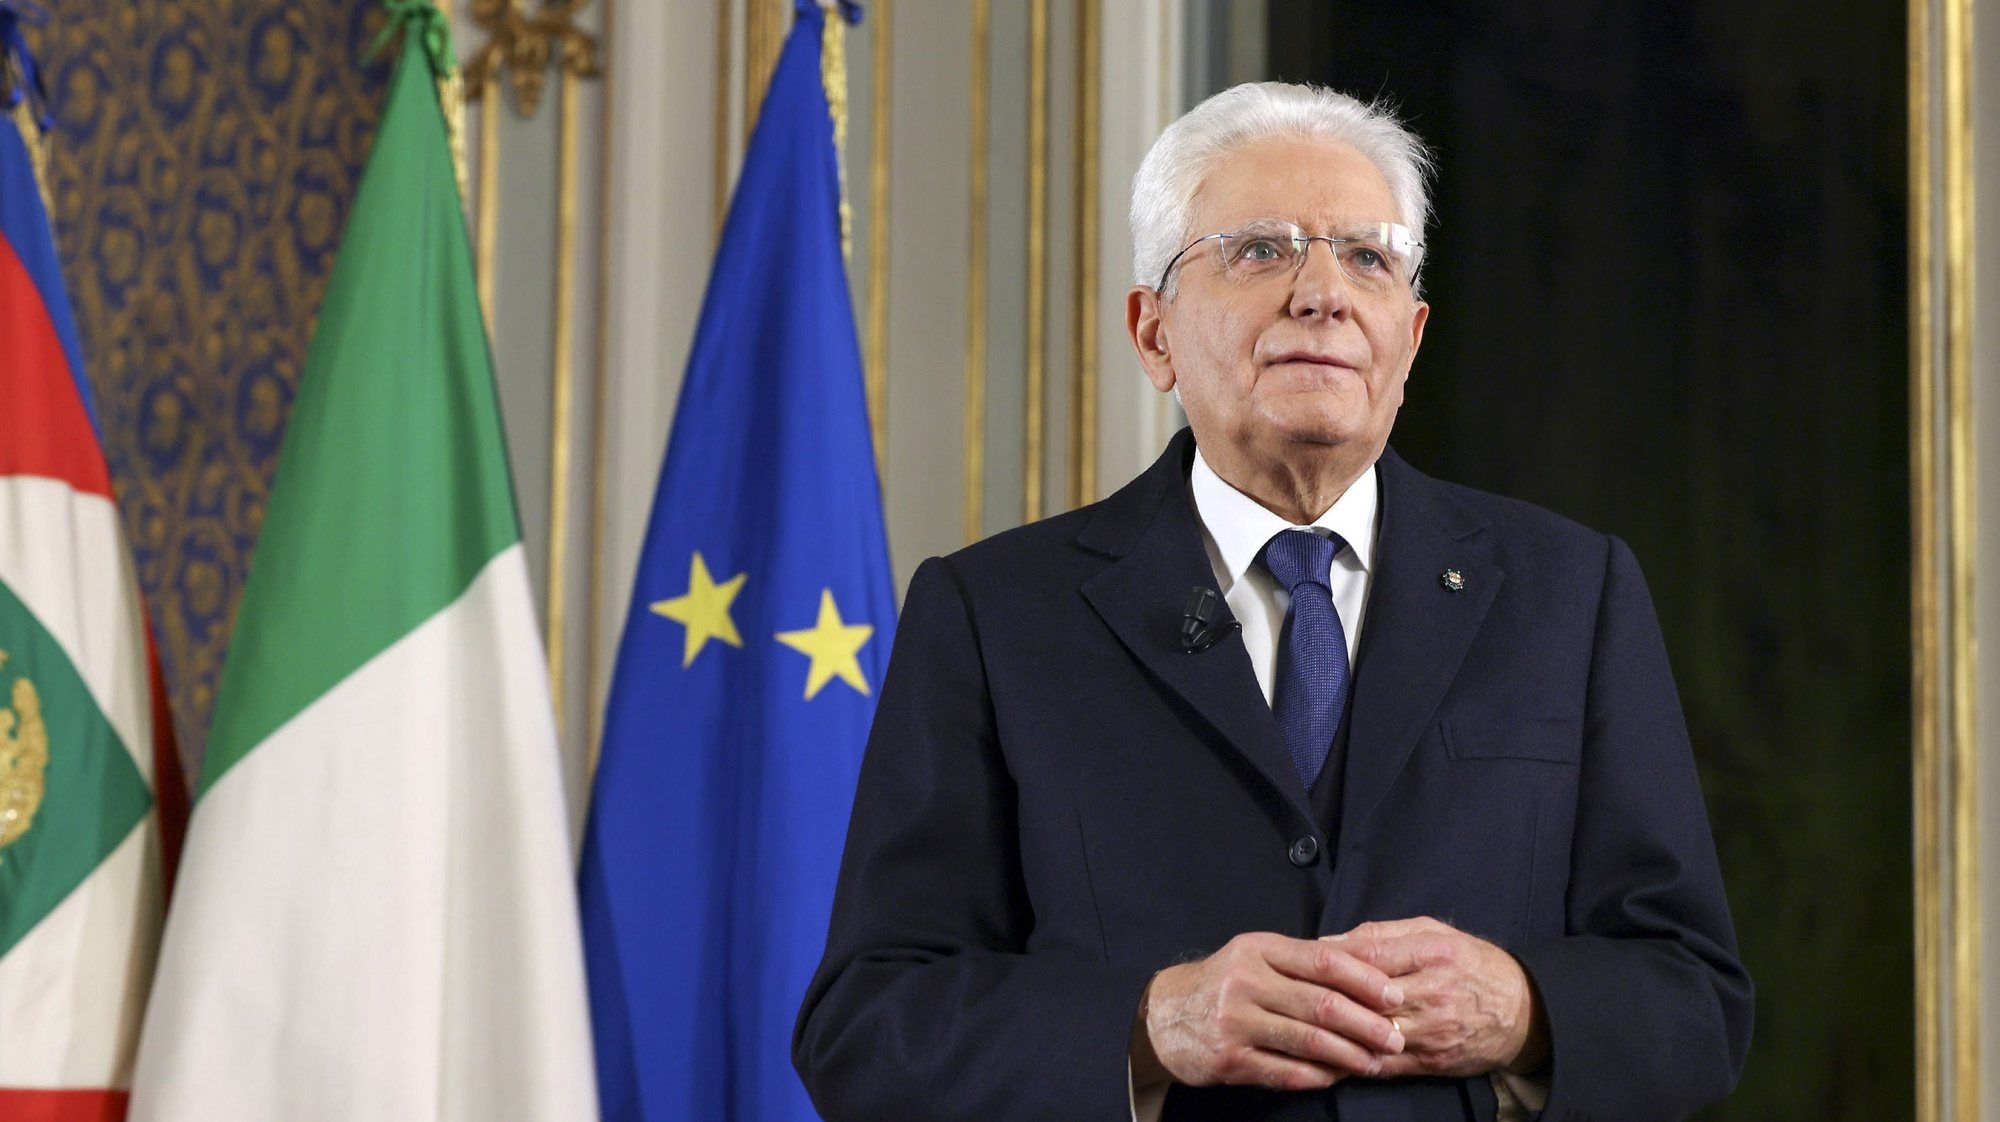 epa09661735 A handout photo made available by the Quirinal Press Office shows Italian President Sergio Mattarella delivering his year-end speech, the last of his seven-year term, in Rome, Italy, 31 December 2021.  EPA/PAOLO GIANDOTTI / Quirinal Press Office/ HANDOUT  HANDOUT EDITORIAL USE ONLY/NO SALES